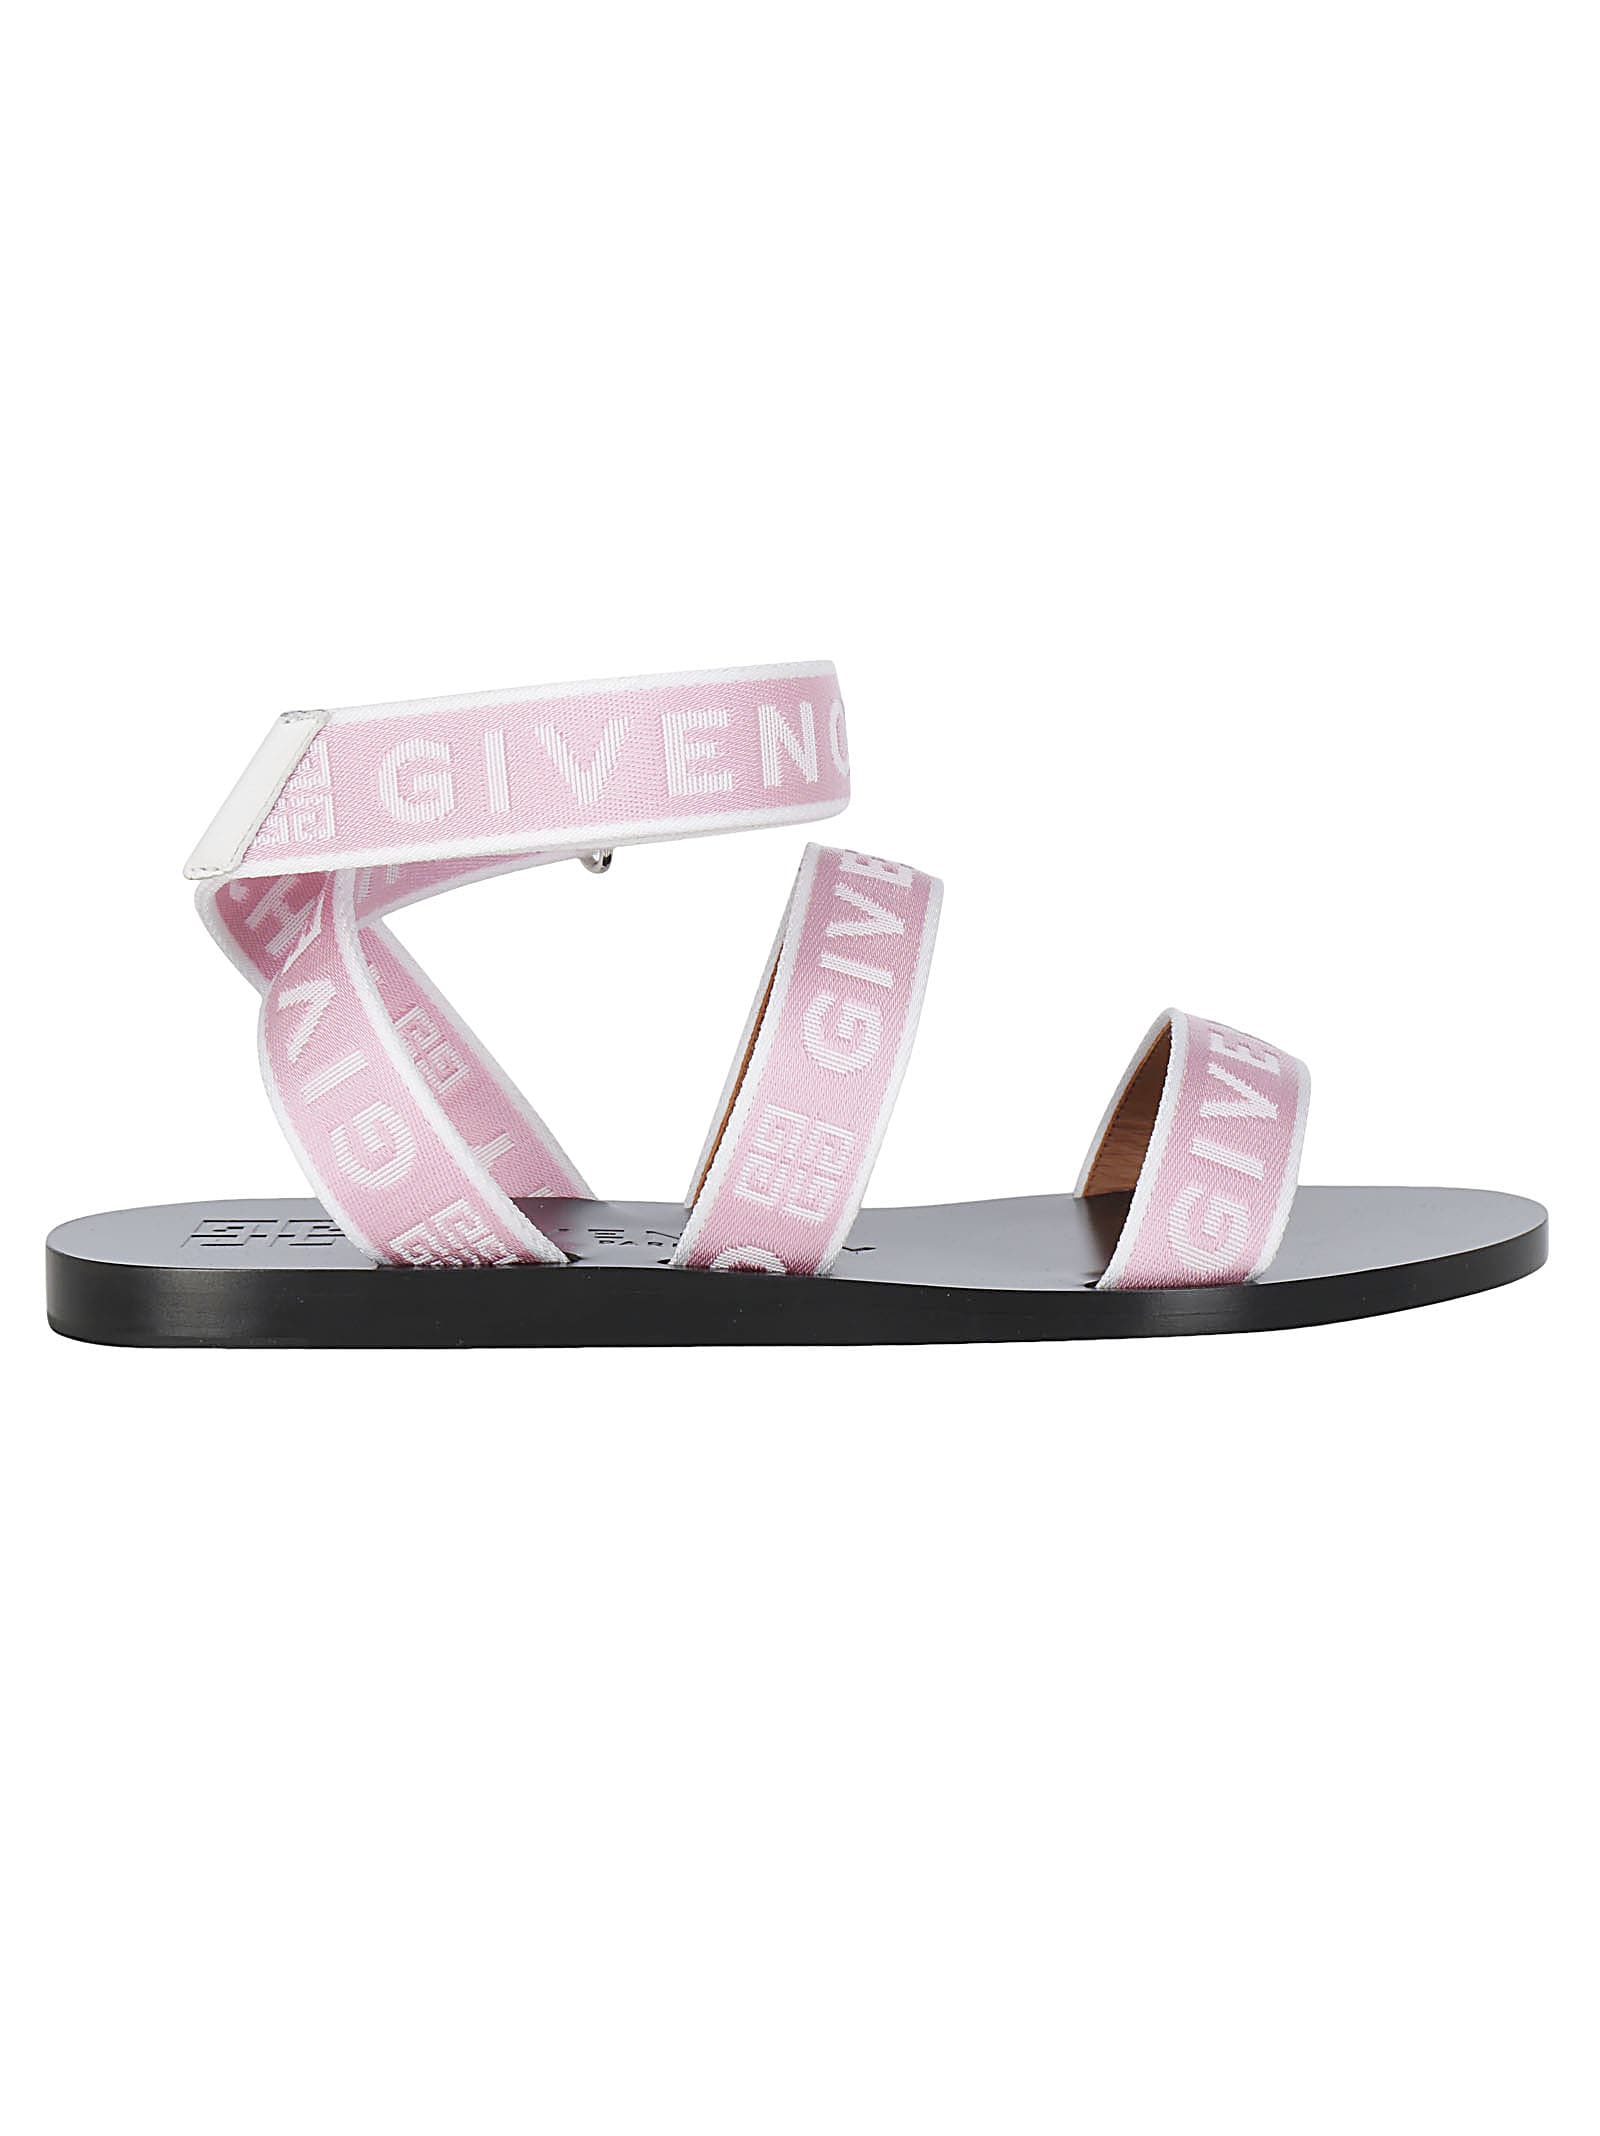 Givenchy Givenchy Sandals - Pink/white 